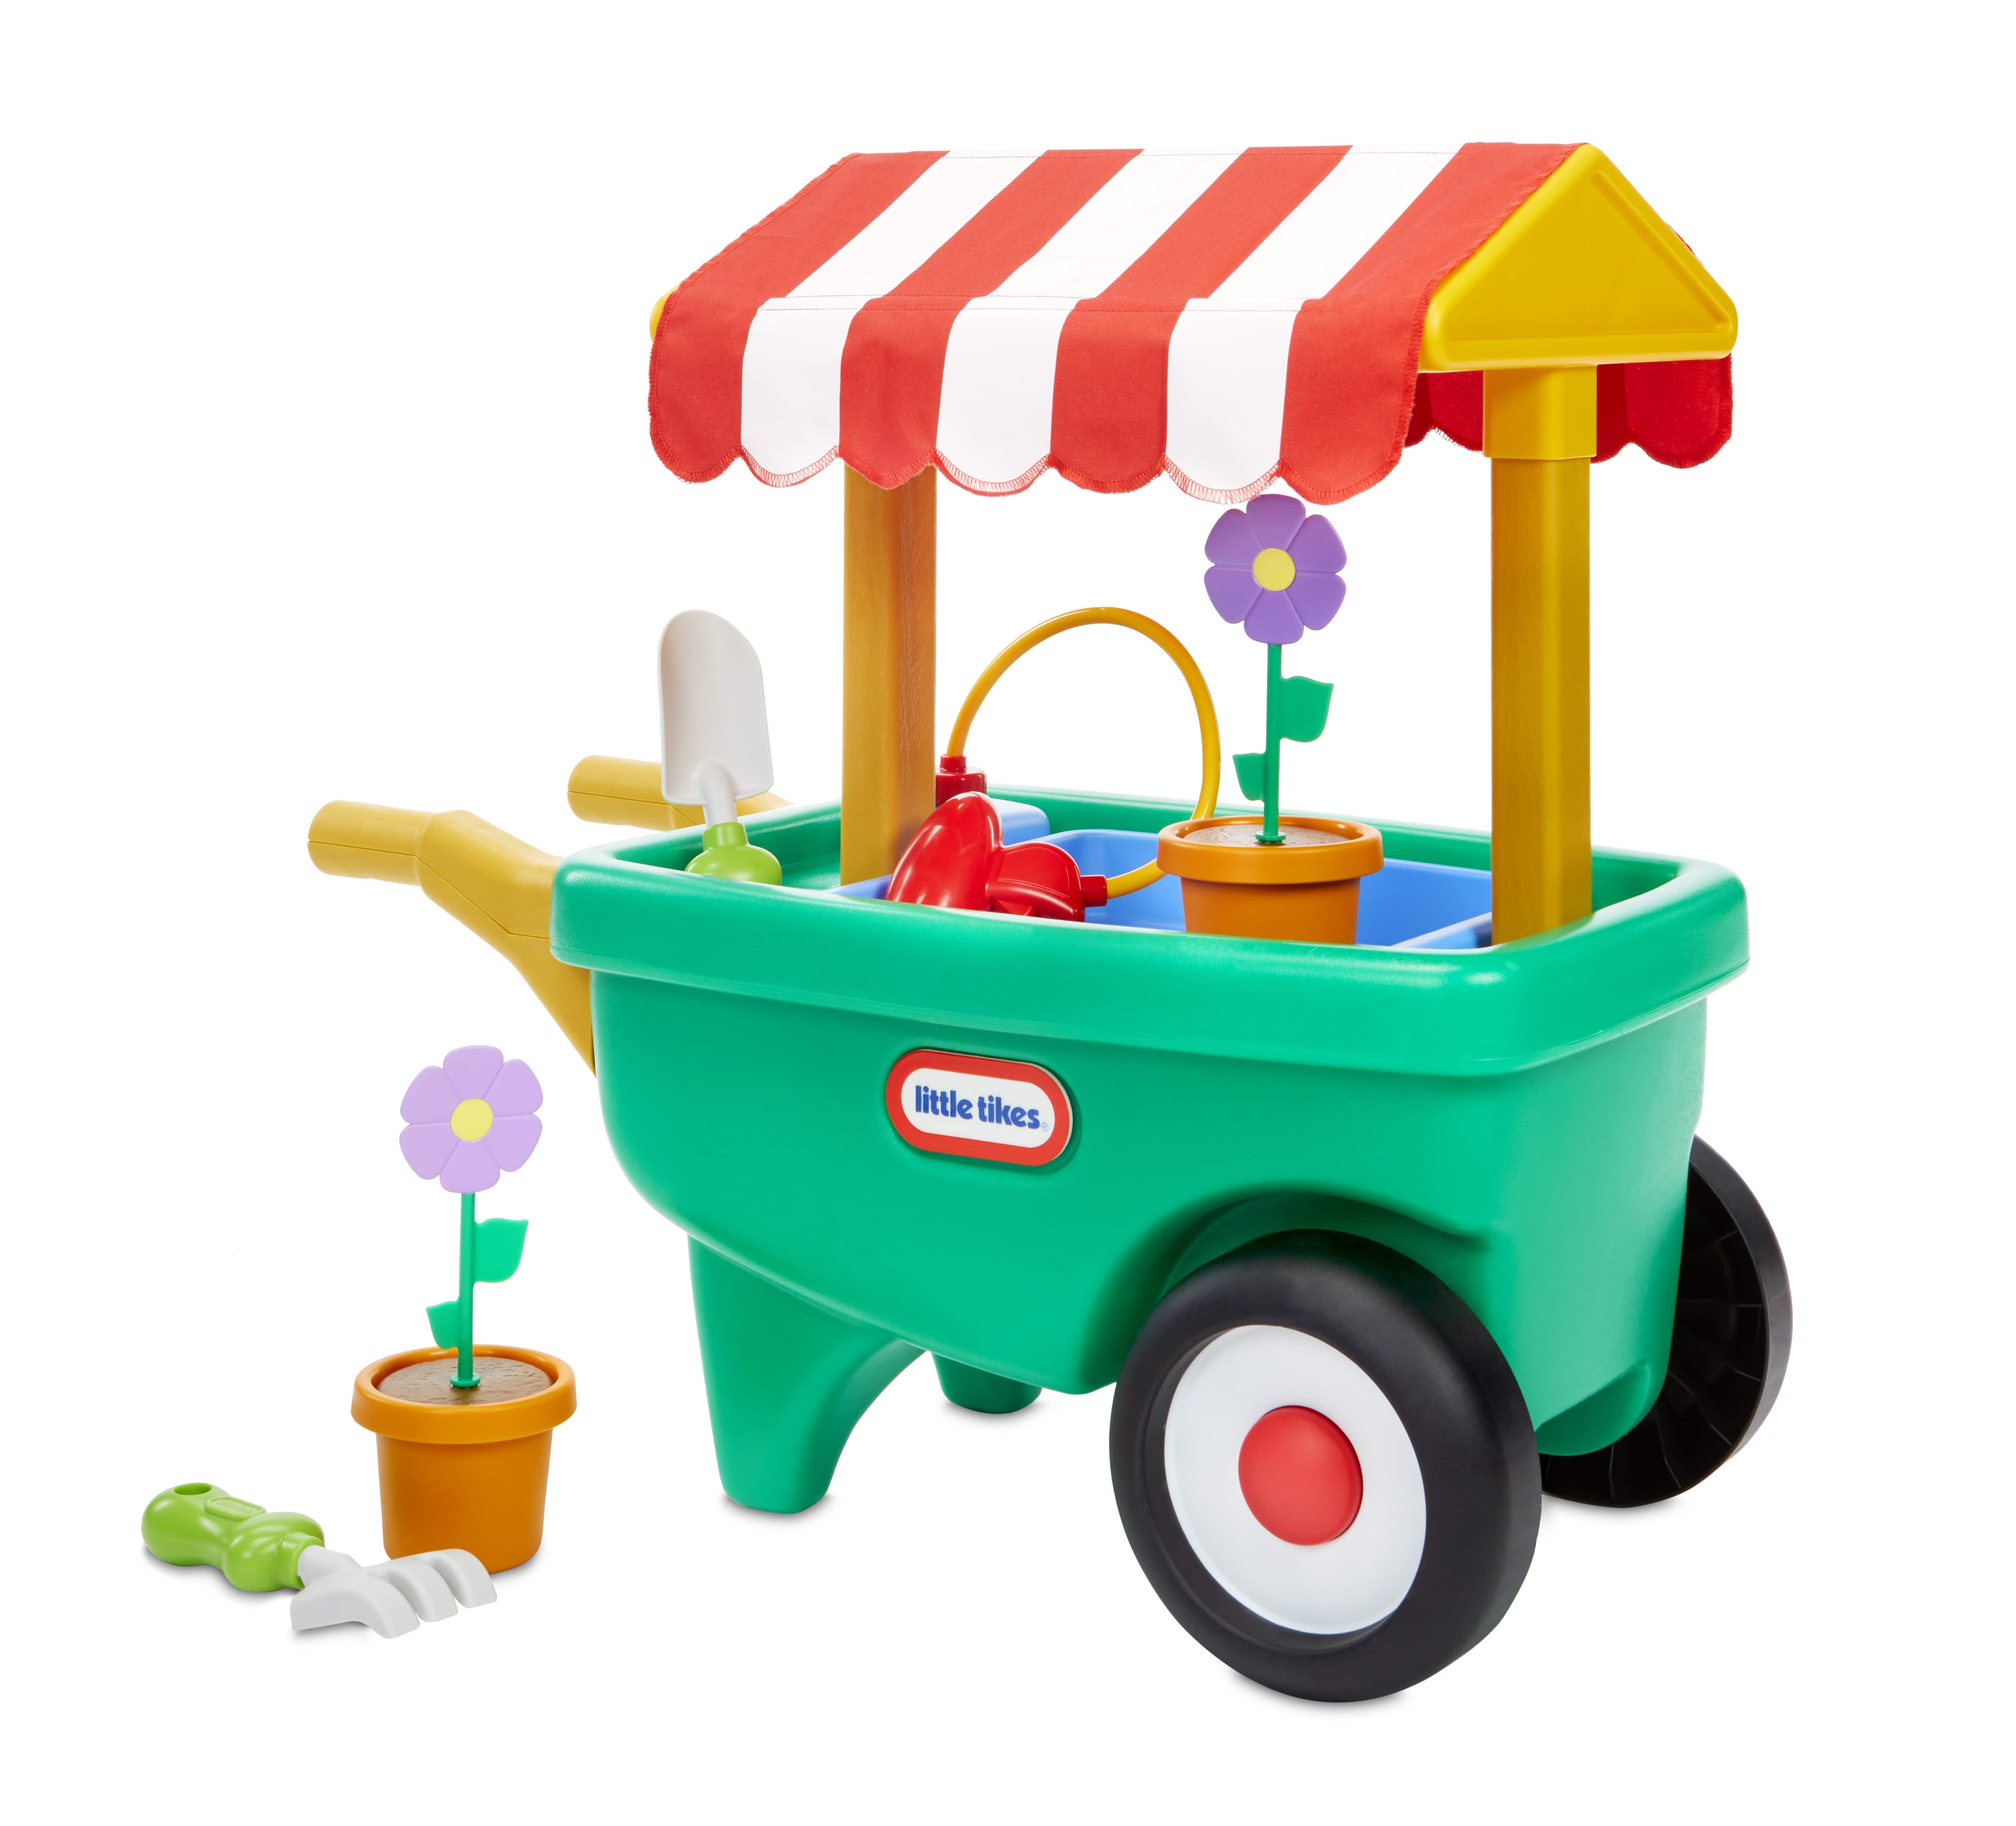 Little Tikes 2-in-1 Garden Cart & Wheelbarrow Play Gardening Toy with 10 Pieces and Sprinkler for Indoor Outdoor Preschool Pretend Play for Kids Toddlers Girls Boys Ages 2 3 4+ - image 1 of 7